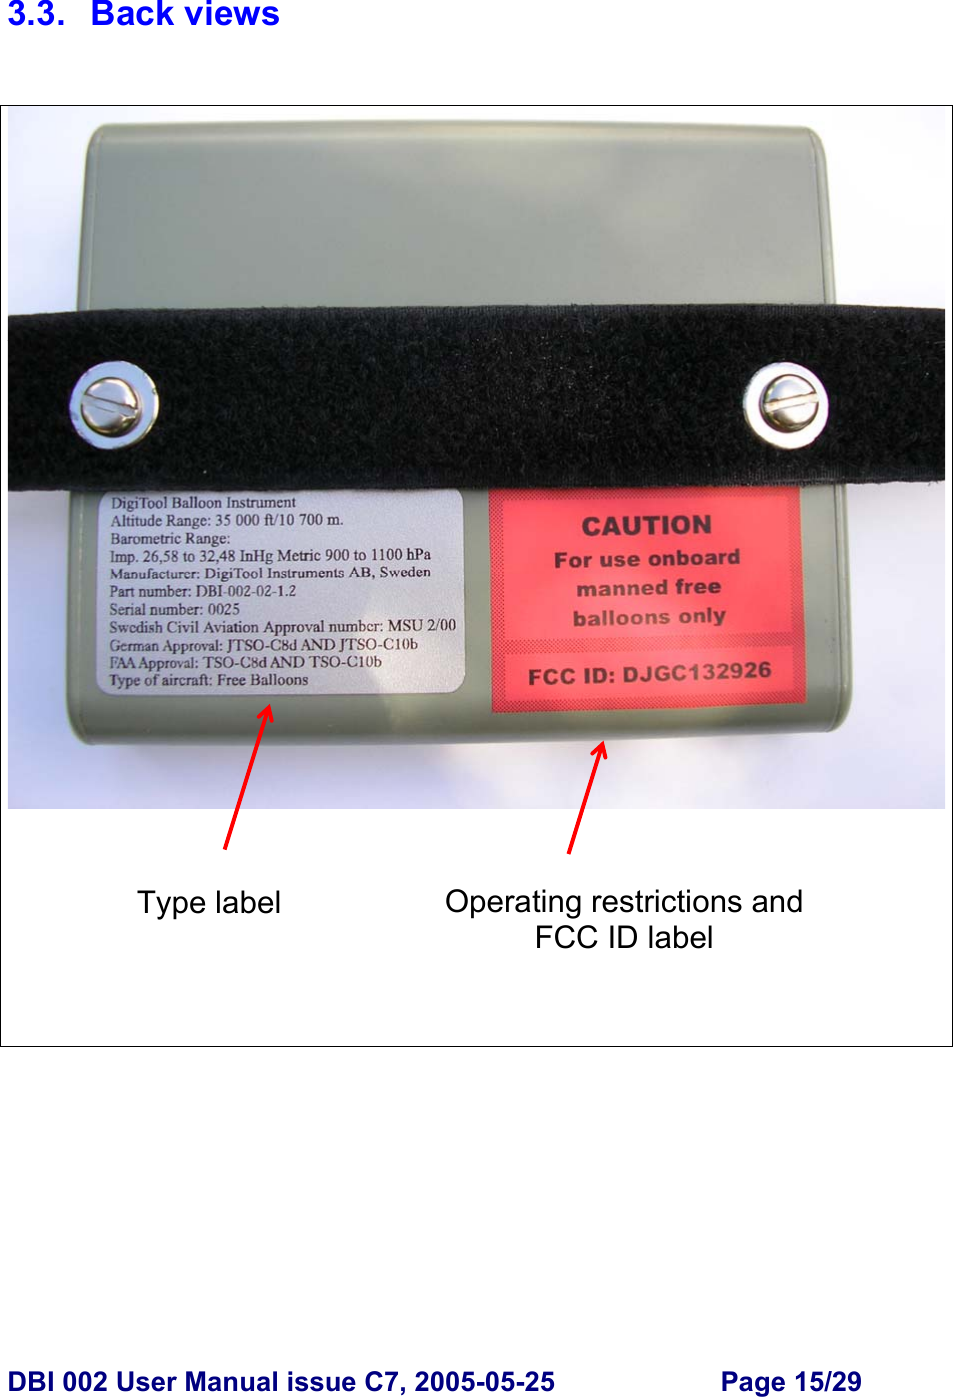  DBI 002 User Manual issue C7, 2005-05-25  Page 15/29  3.3. Back views    Type label  Operating restrictions and FCC ID label 